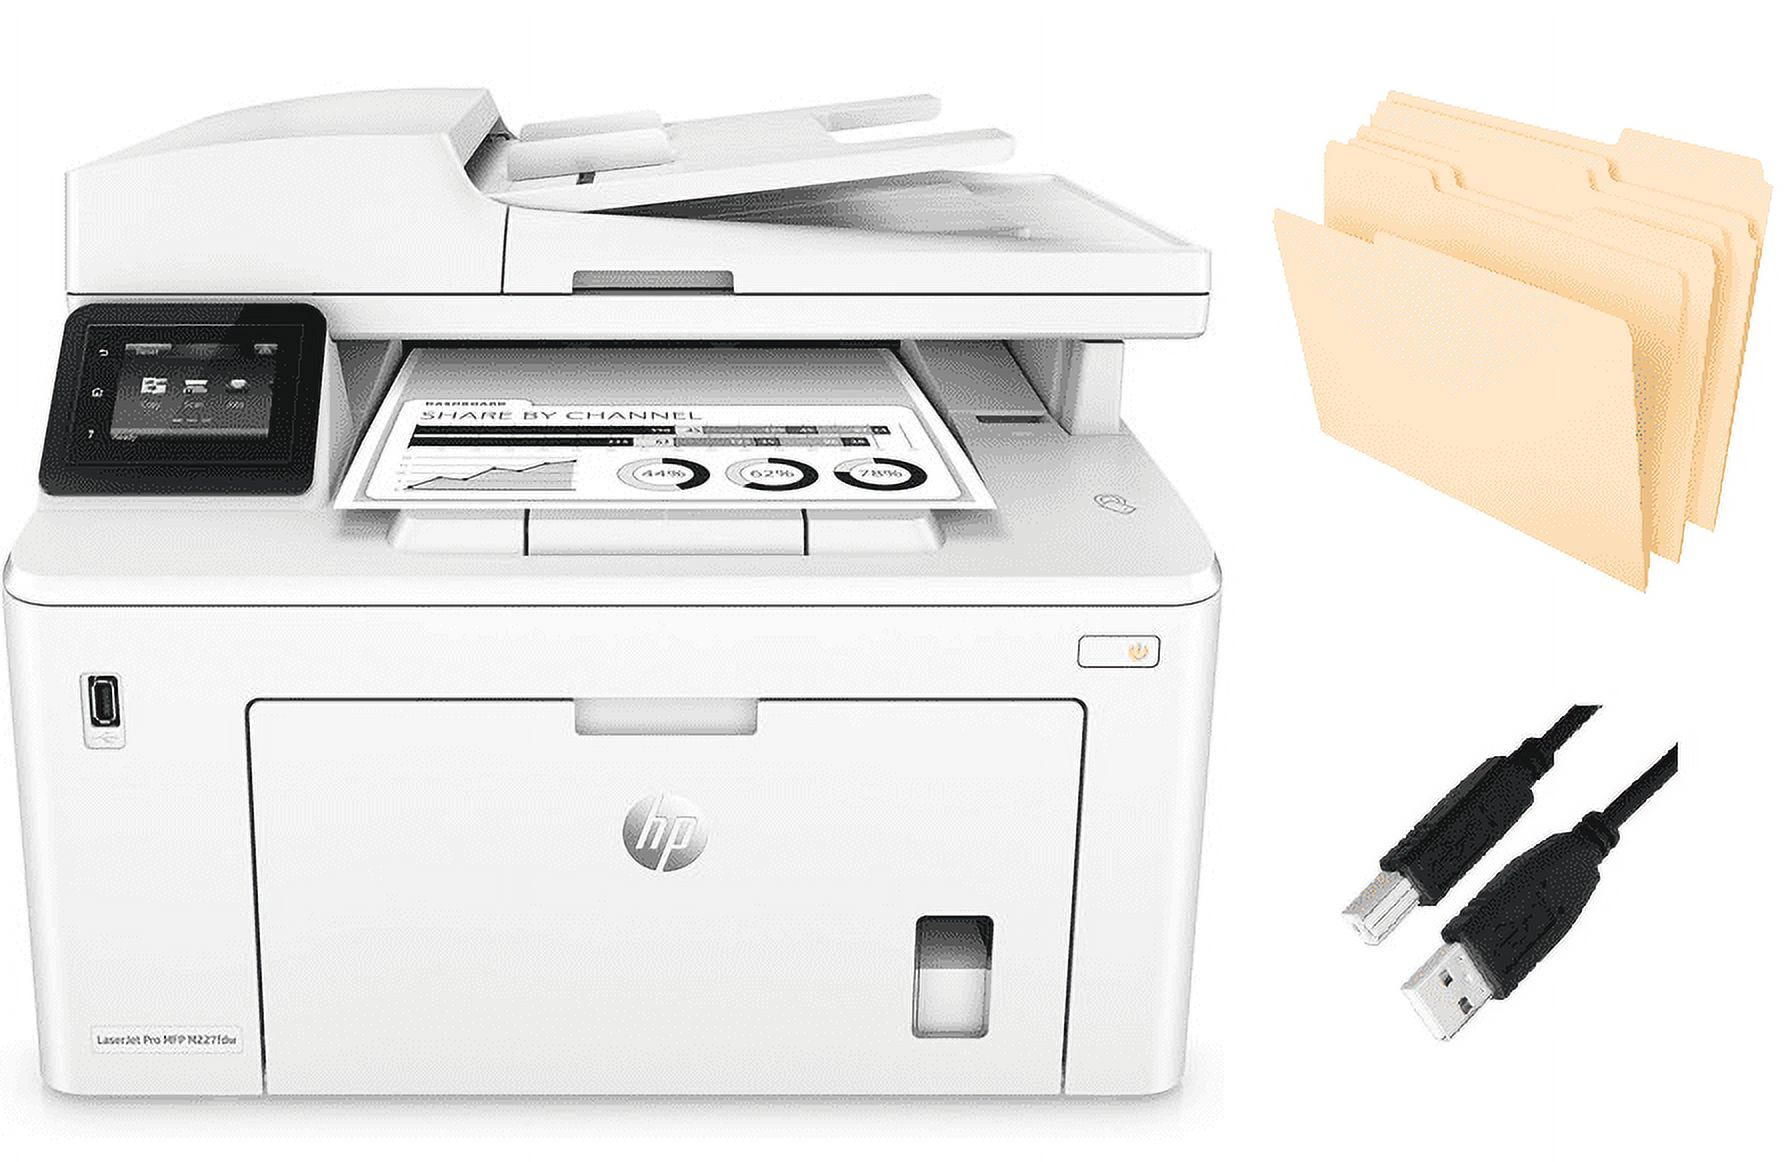 HP LaserJet Pro M227fdw Black-and-White All-in-One Wireless Laser Printer (G3Q75A) Print, Scan, Copy, Fax With DE USB Cable and File Folders - image 1 of 9